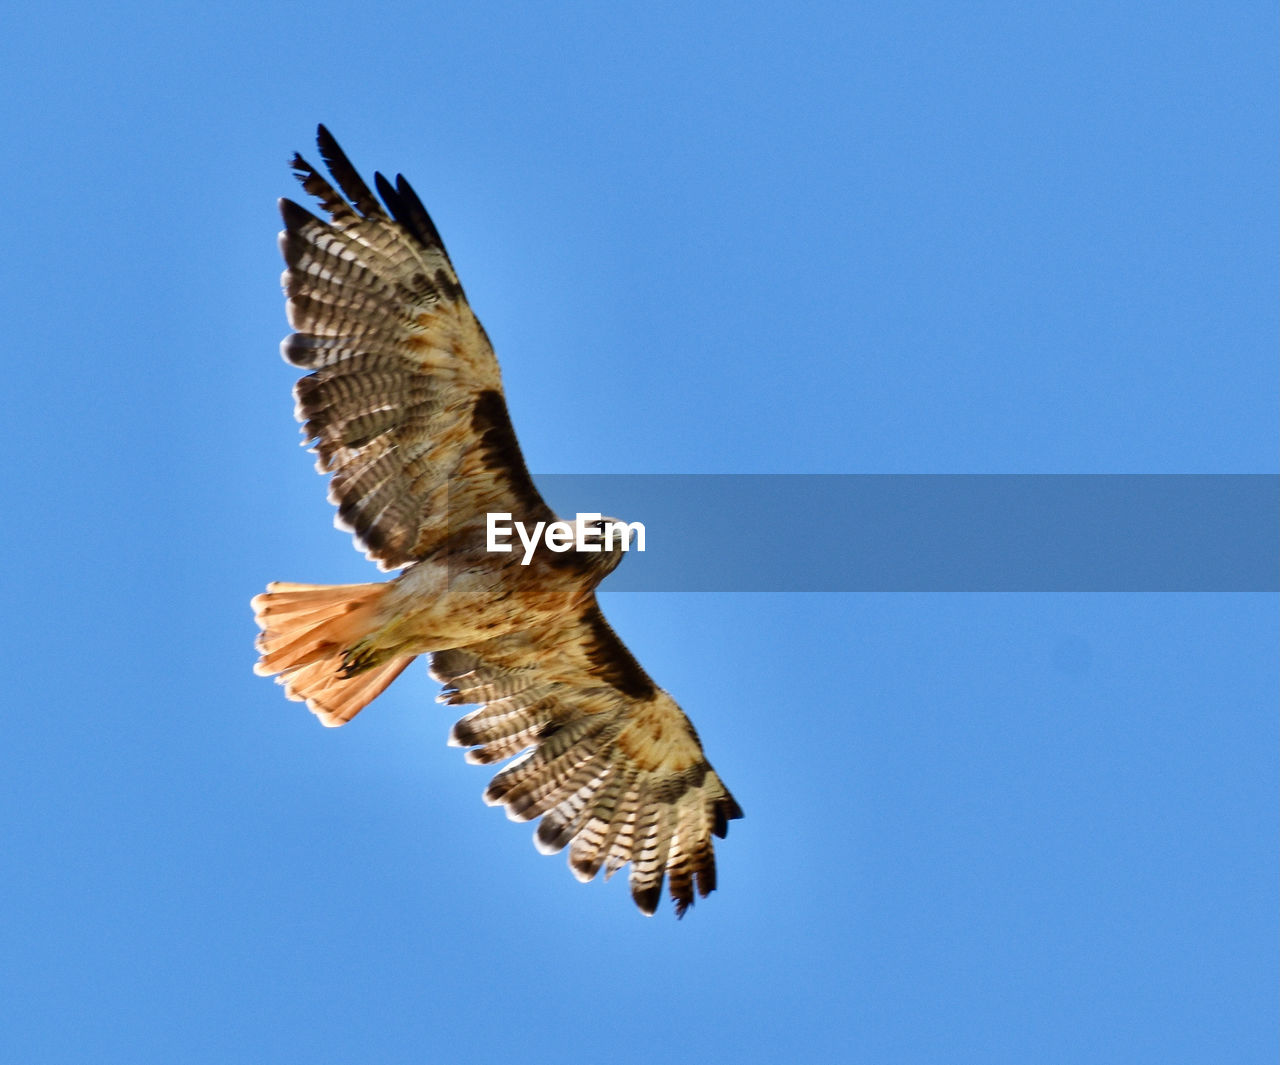 animal themes, animal, flying, bird, animal wildlife, wildlife, one animal, bird of prey, spread wings, sky, animal body part, blue, clear sky, buzzard, nature, hawk, falcon, mid-air, no people, motion, beak, low angle view, eagle, wing, animal wing, beauty in nature, sunny, copy space, outdoors, full length, day